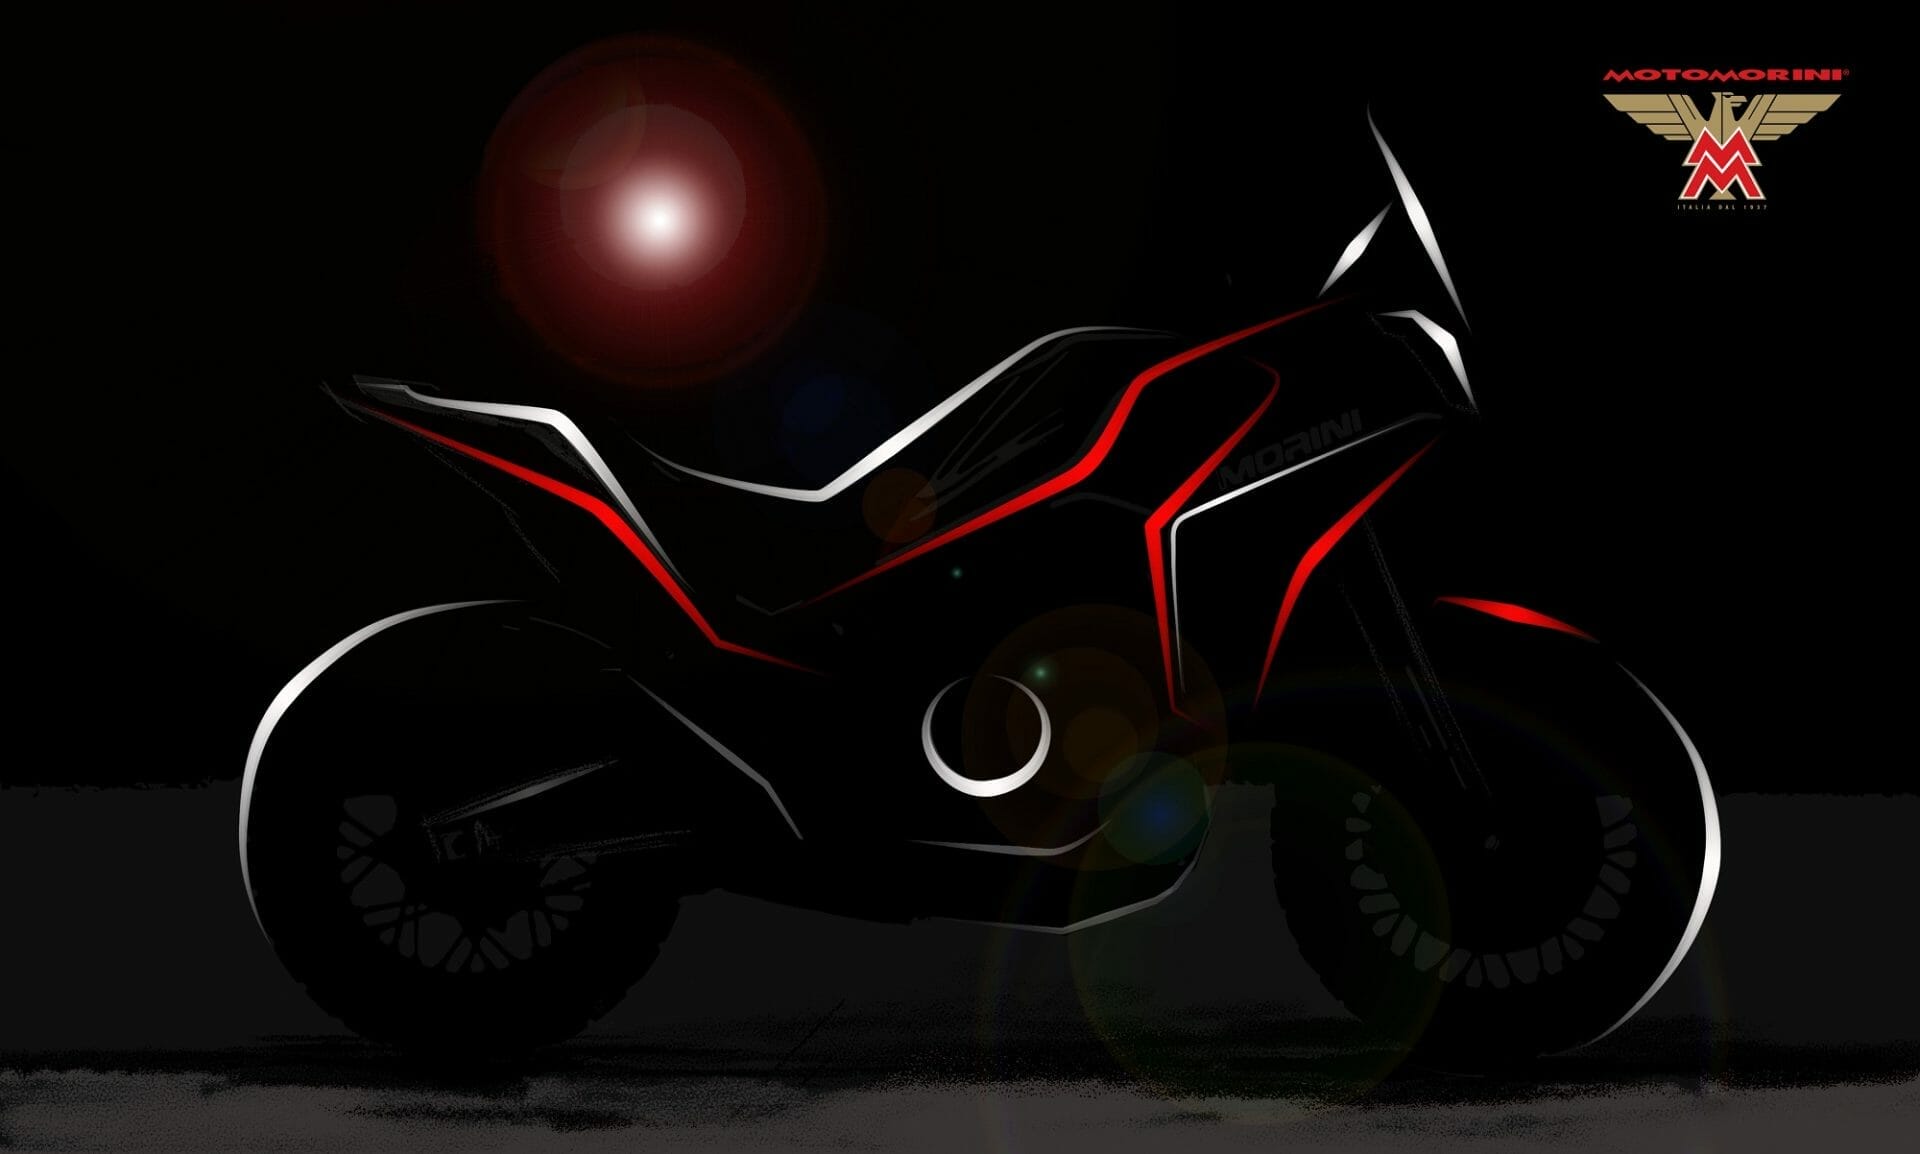 Moto Morini with new platform for different models